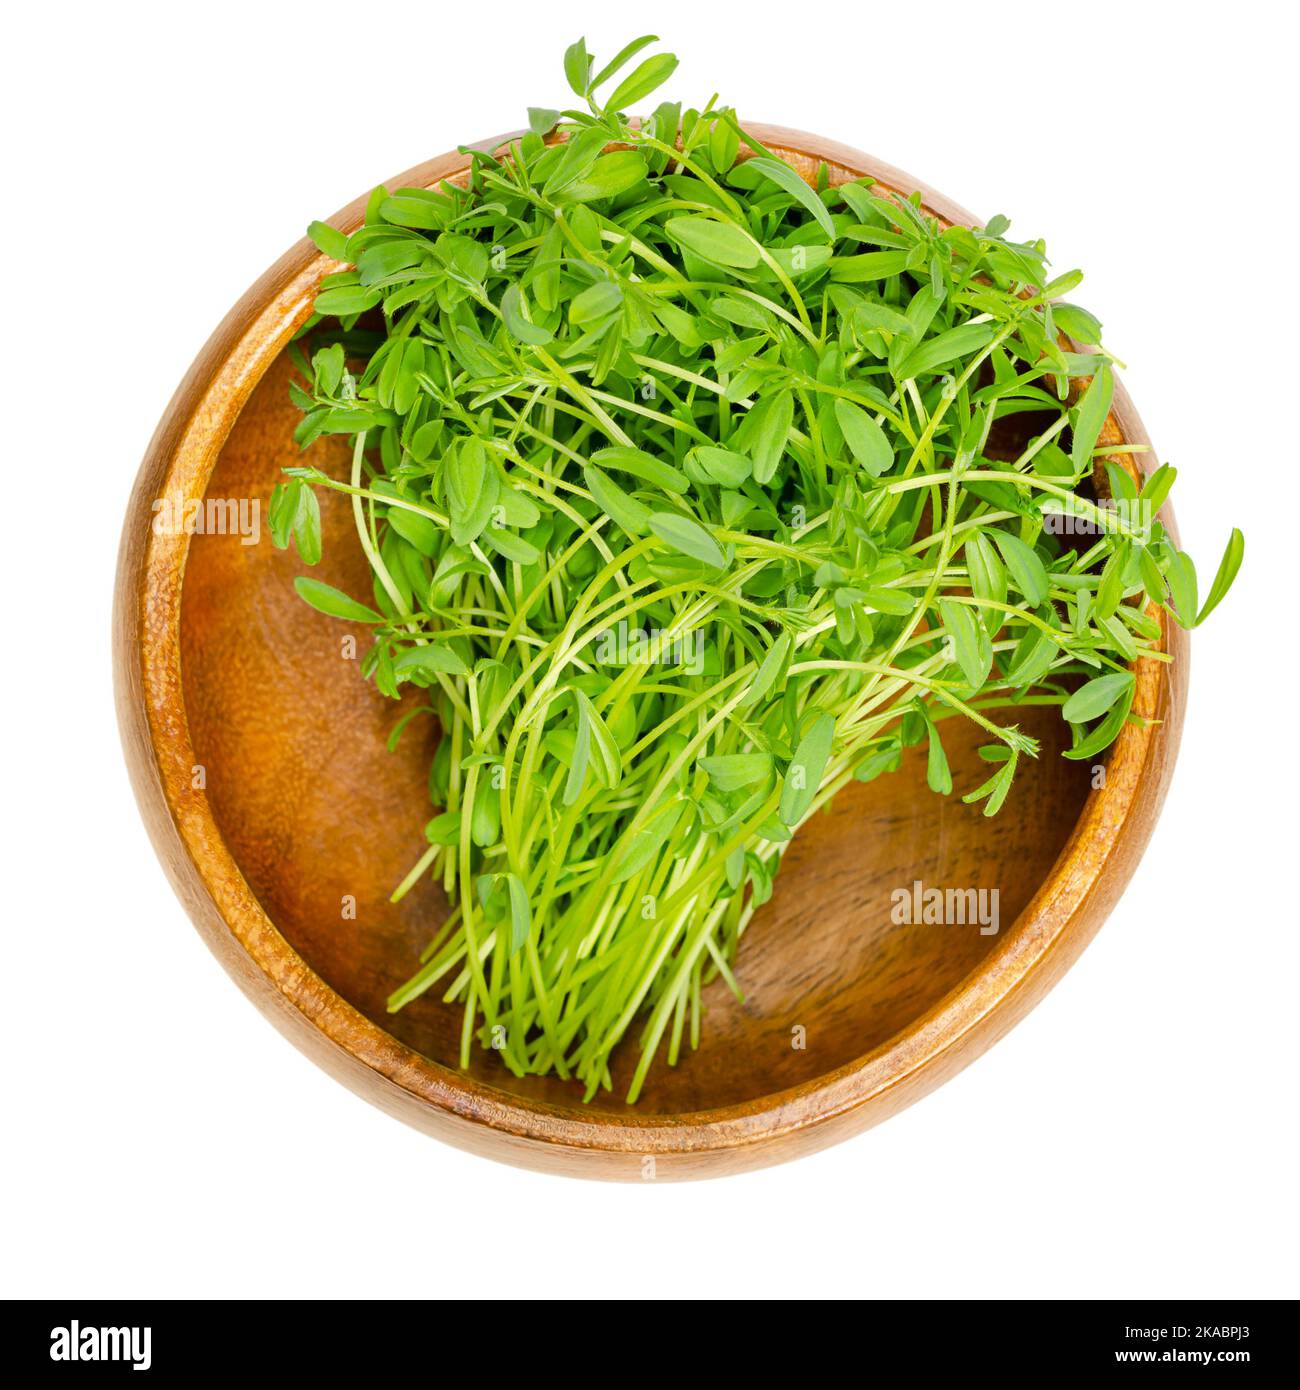 Brown lentil microgreens in a wooden bowl. Ready-to-eat sprouts, green seedlings, young plants and shoots of mountain lentils, lens culinaris. Stock Photo